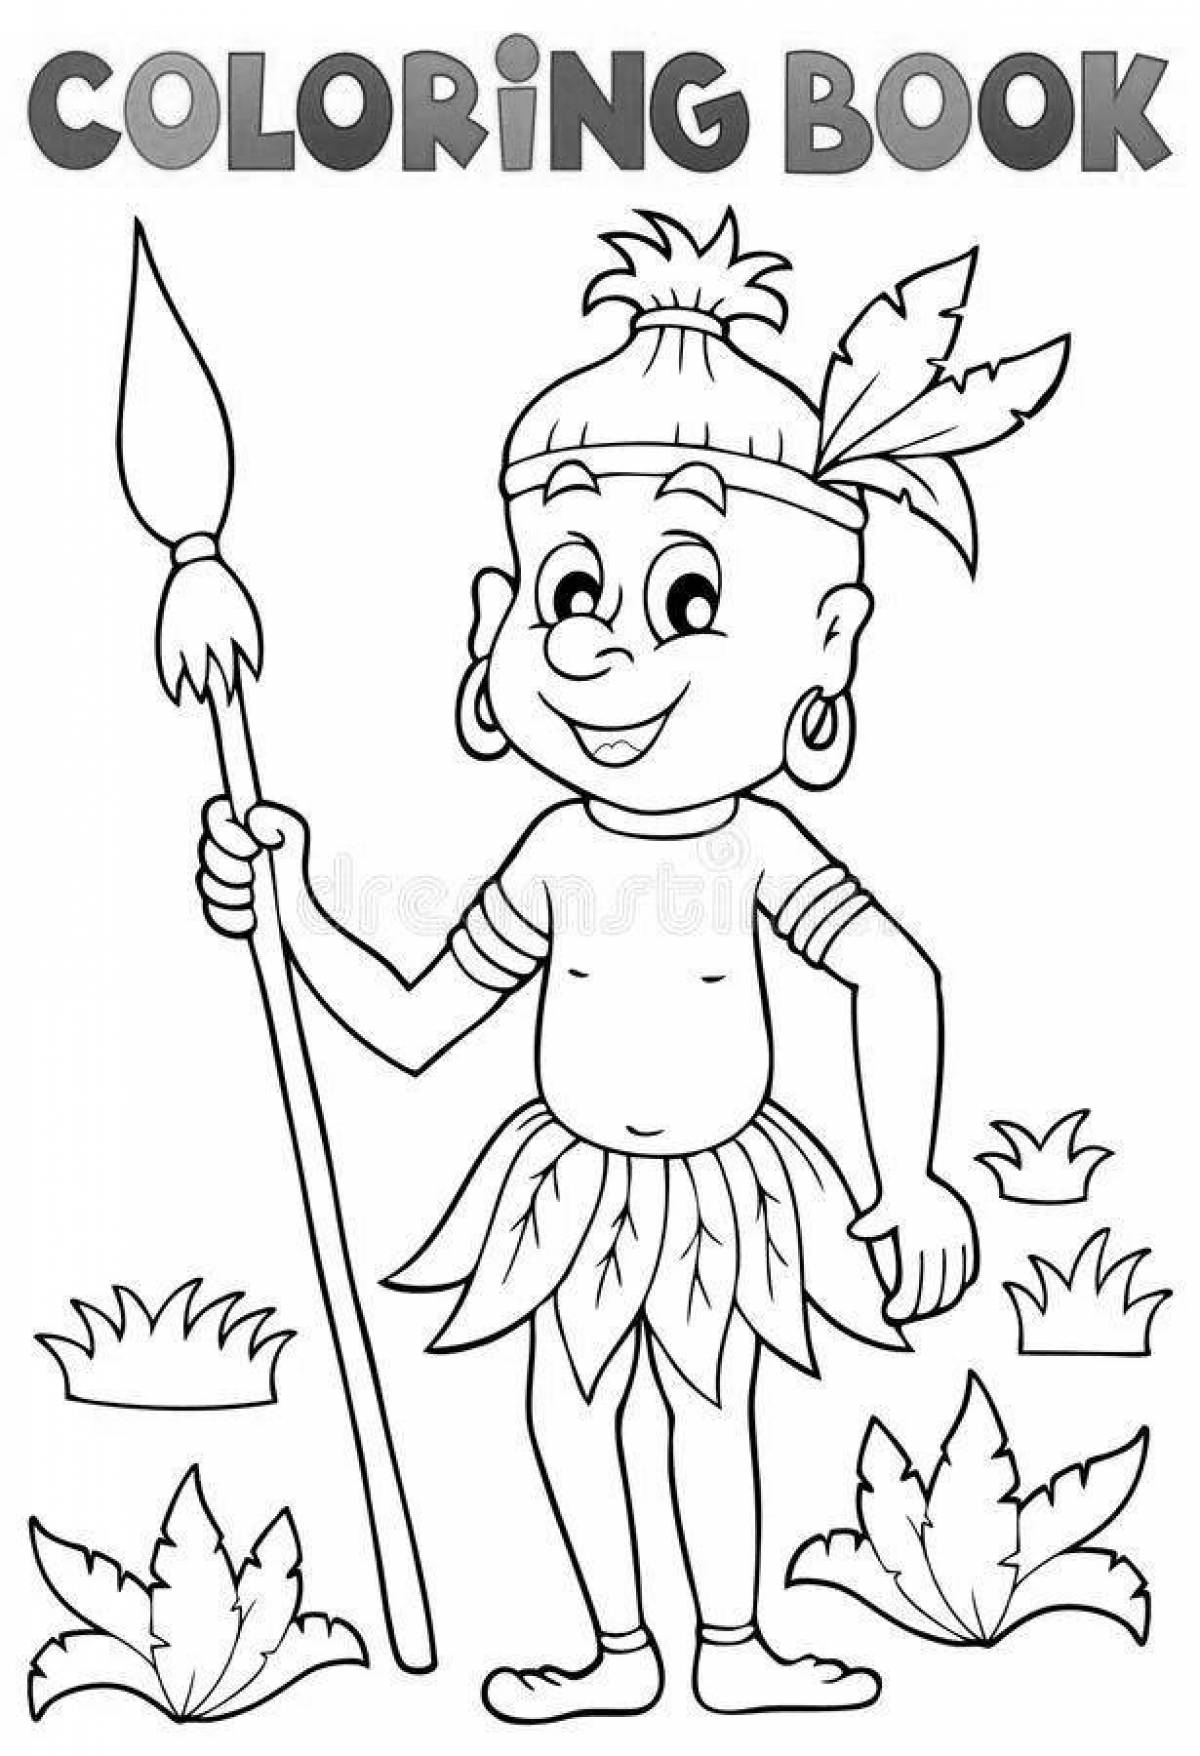 Chunga chang's lovely coloring page